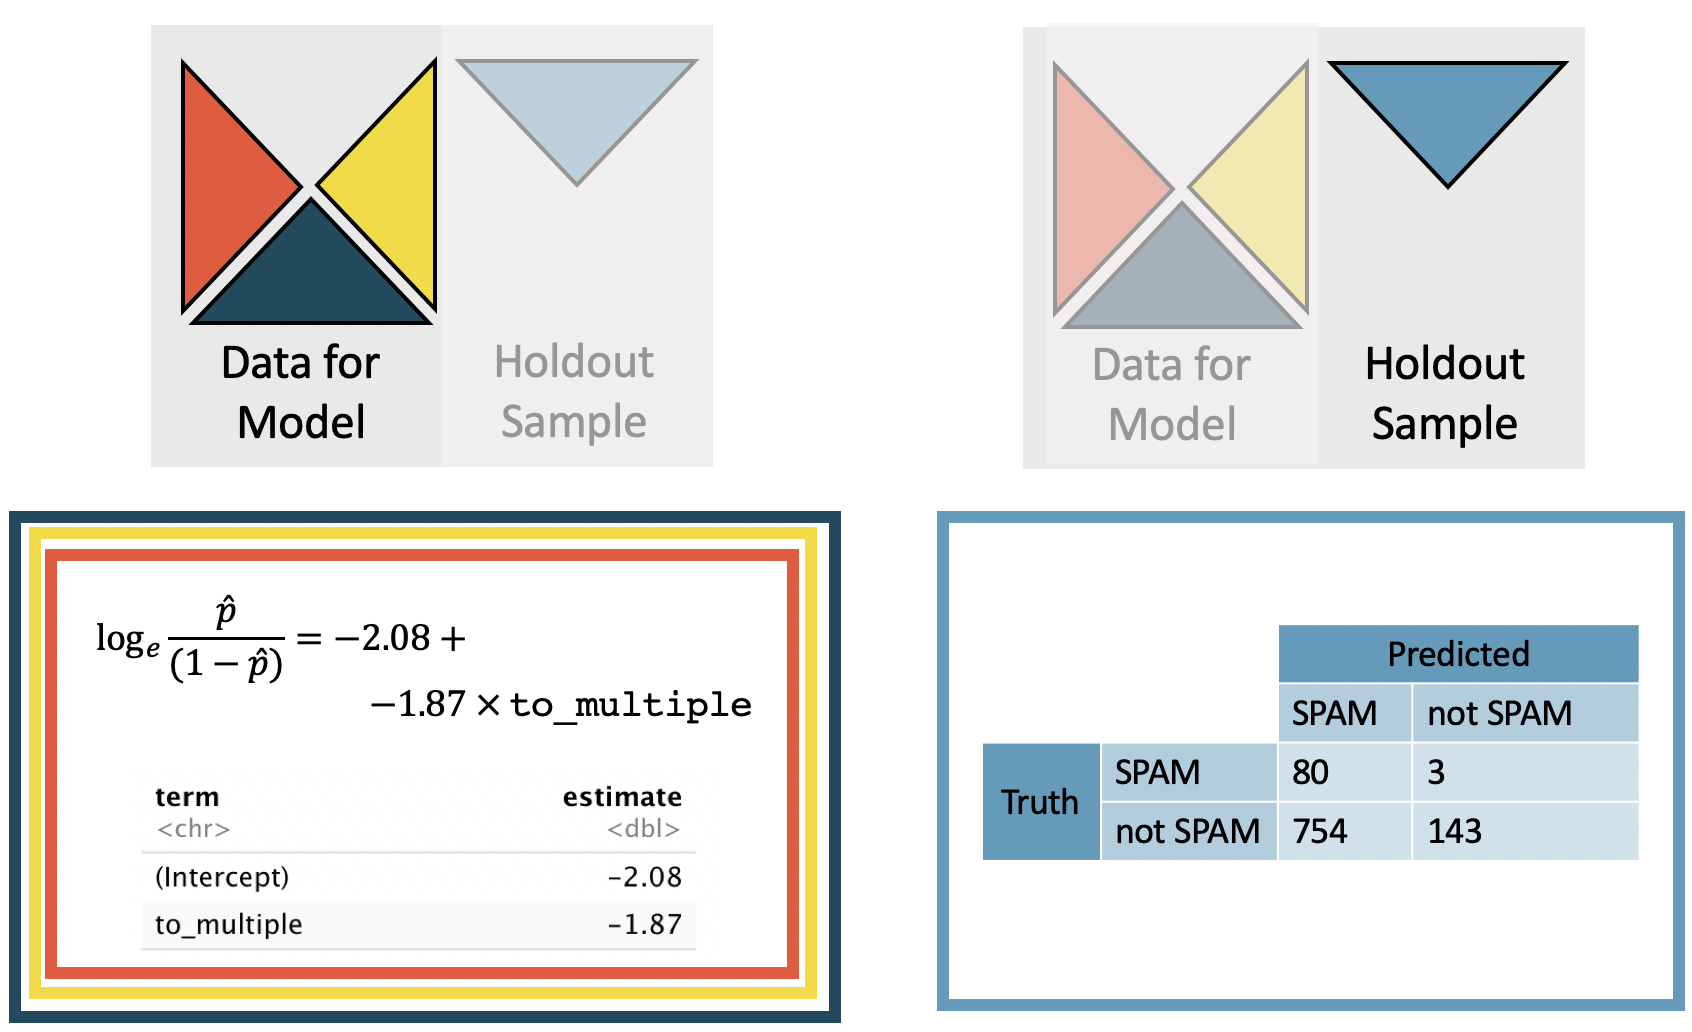 The left panel shows the logistic model predicting the probability of an email being spam as a function of whether the email was sent to multiple individuals; the model was built using the red, green, and yellow triangular sections of the observed data. The right panel shows a confusion matrix of the predicted spam label crossed with the observed spam label for the set of observations in the blue triangular section of the observed data. Of the 83 spam emails, 80 were correctly classified as spam. Of the 897 non-spam emails, 143 were correctly classified as not spam.